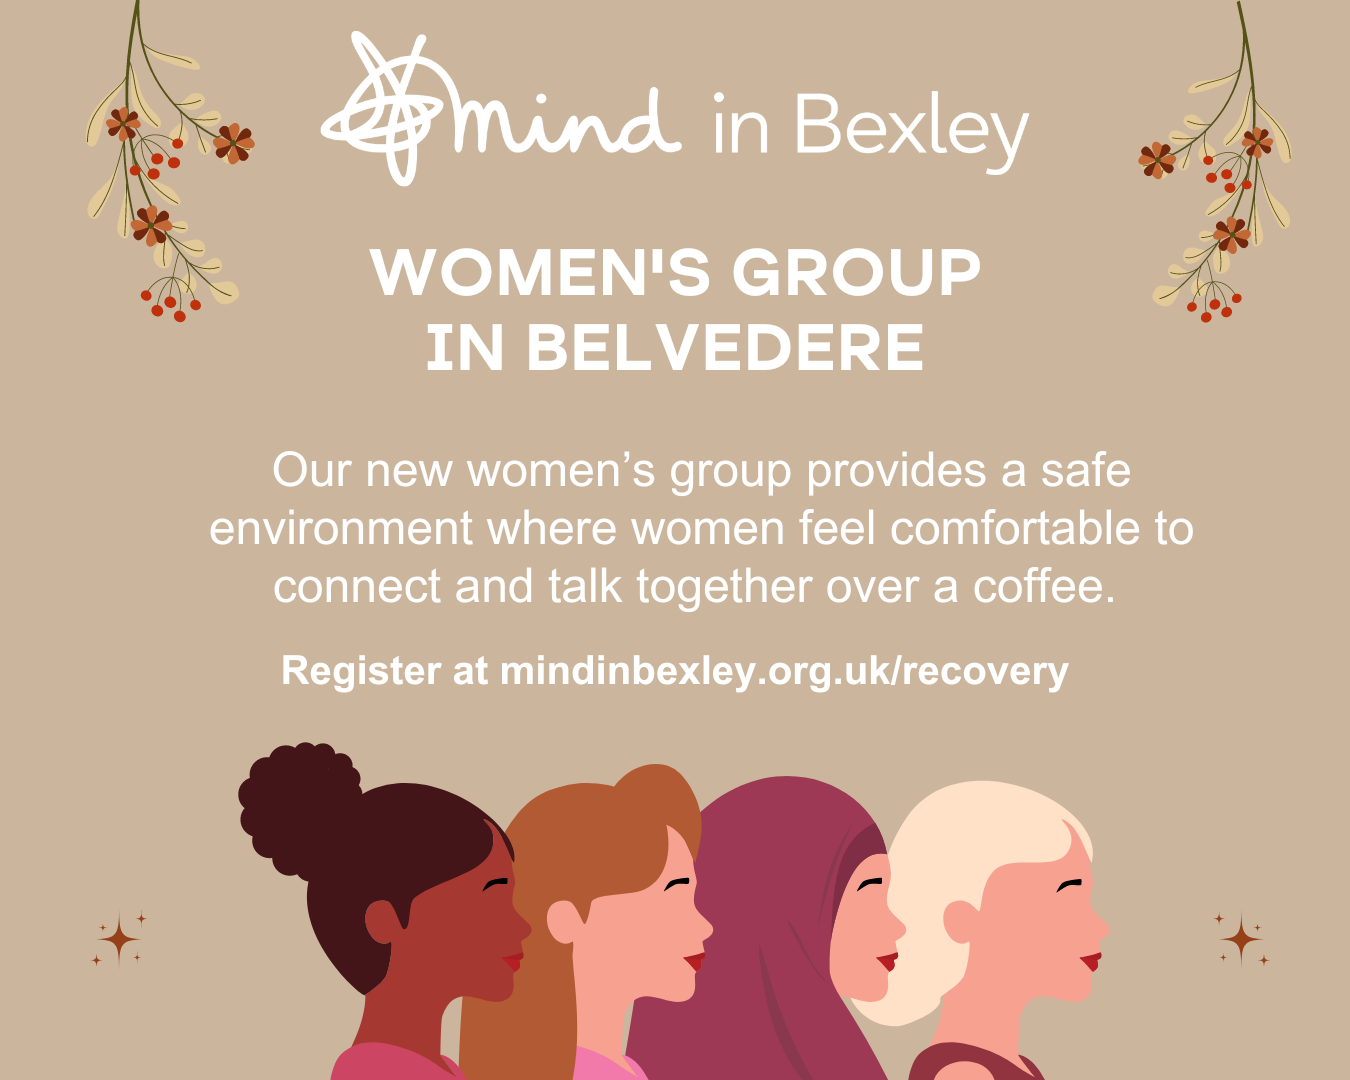 Poster advertising the new Women's Group in Belvedere including the sign up link to mindinbexley.org.uk/recovery/